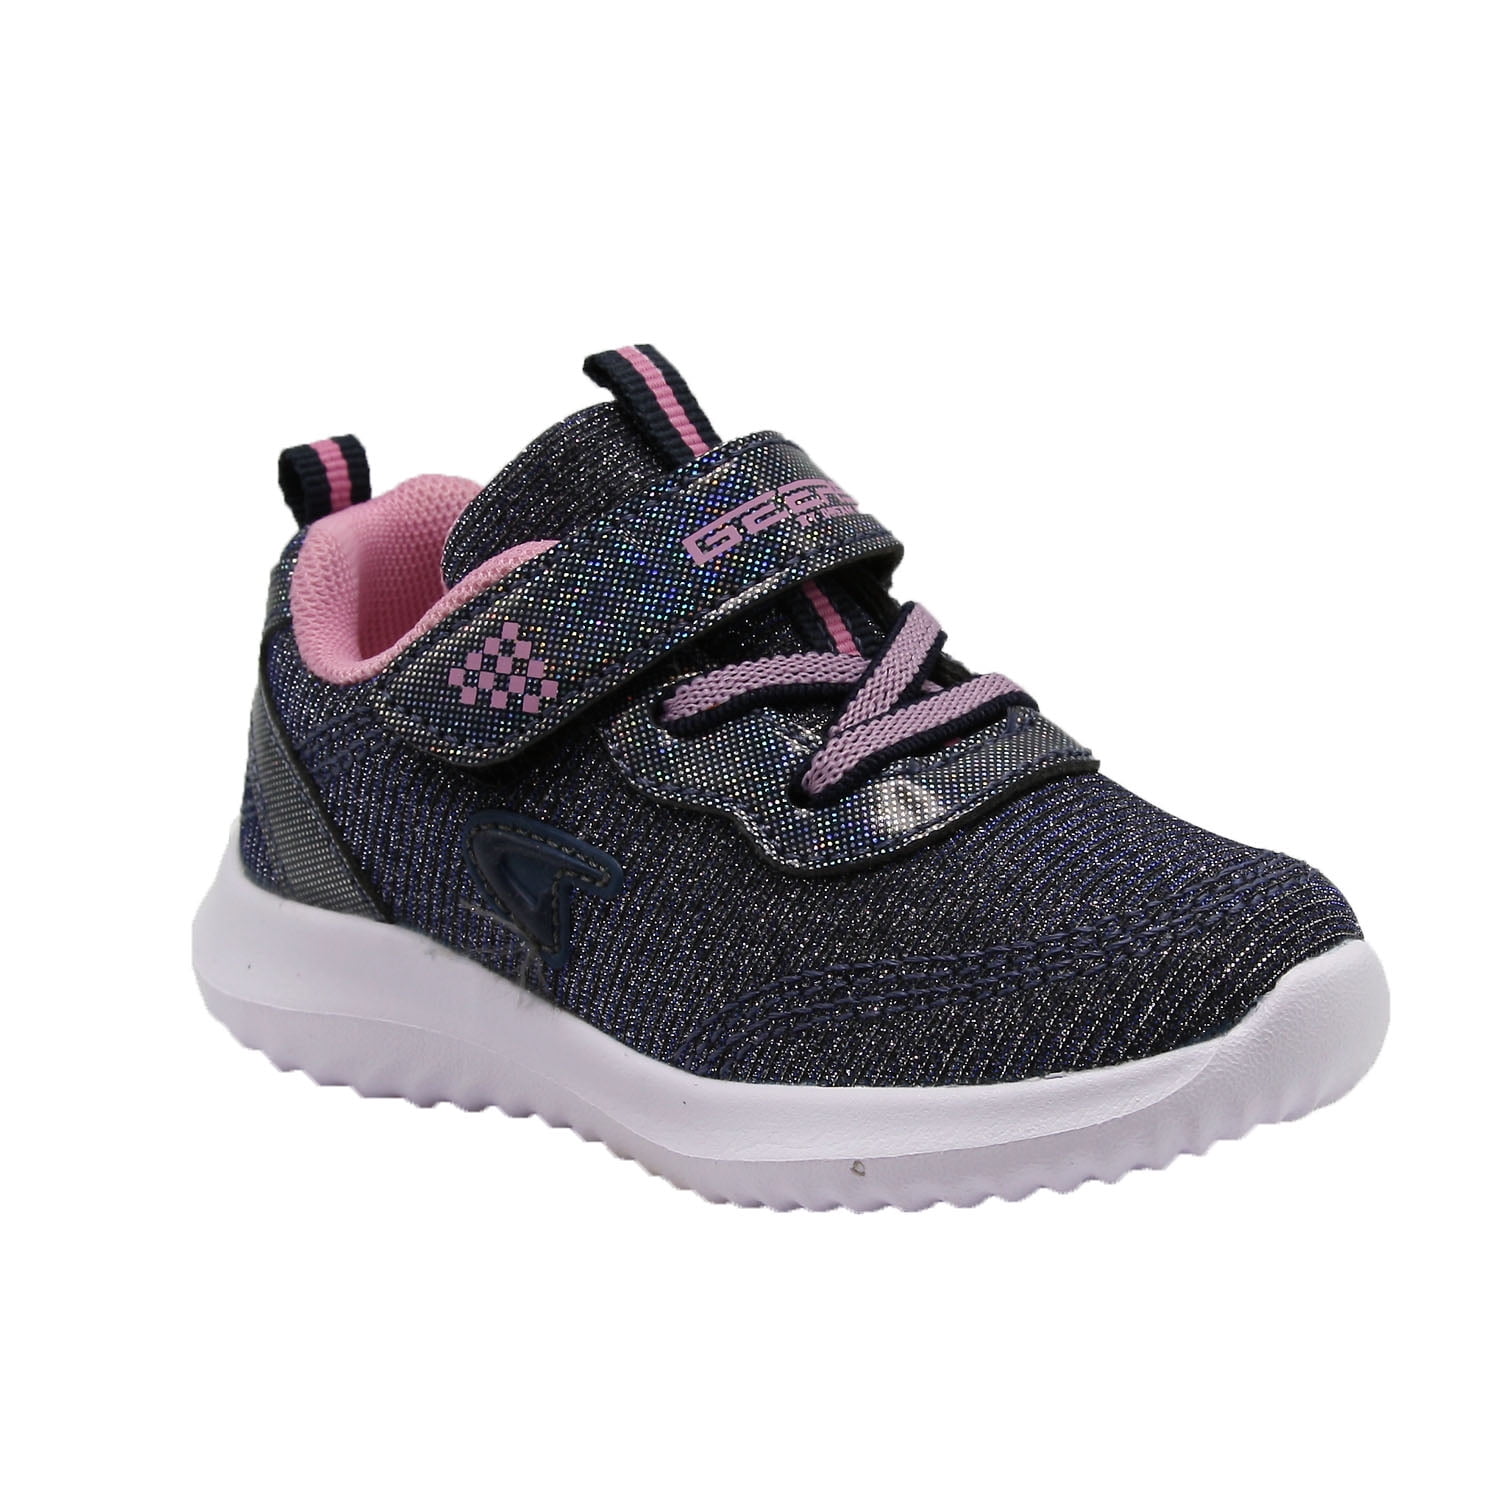 Geers Girls Toddler 3880 Velcro Strap Casual Fashion Sparkle Sneaker ...